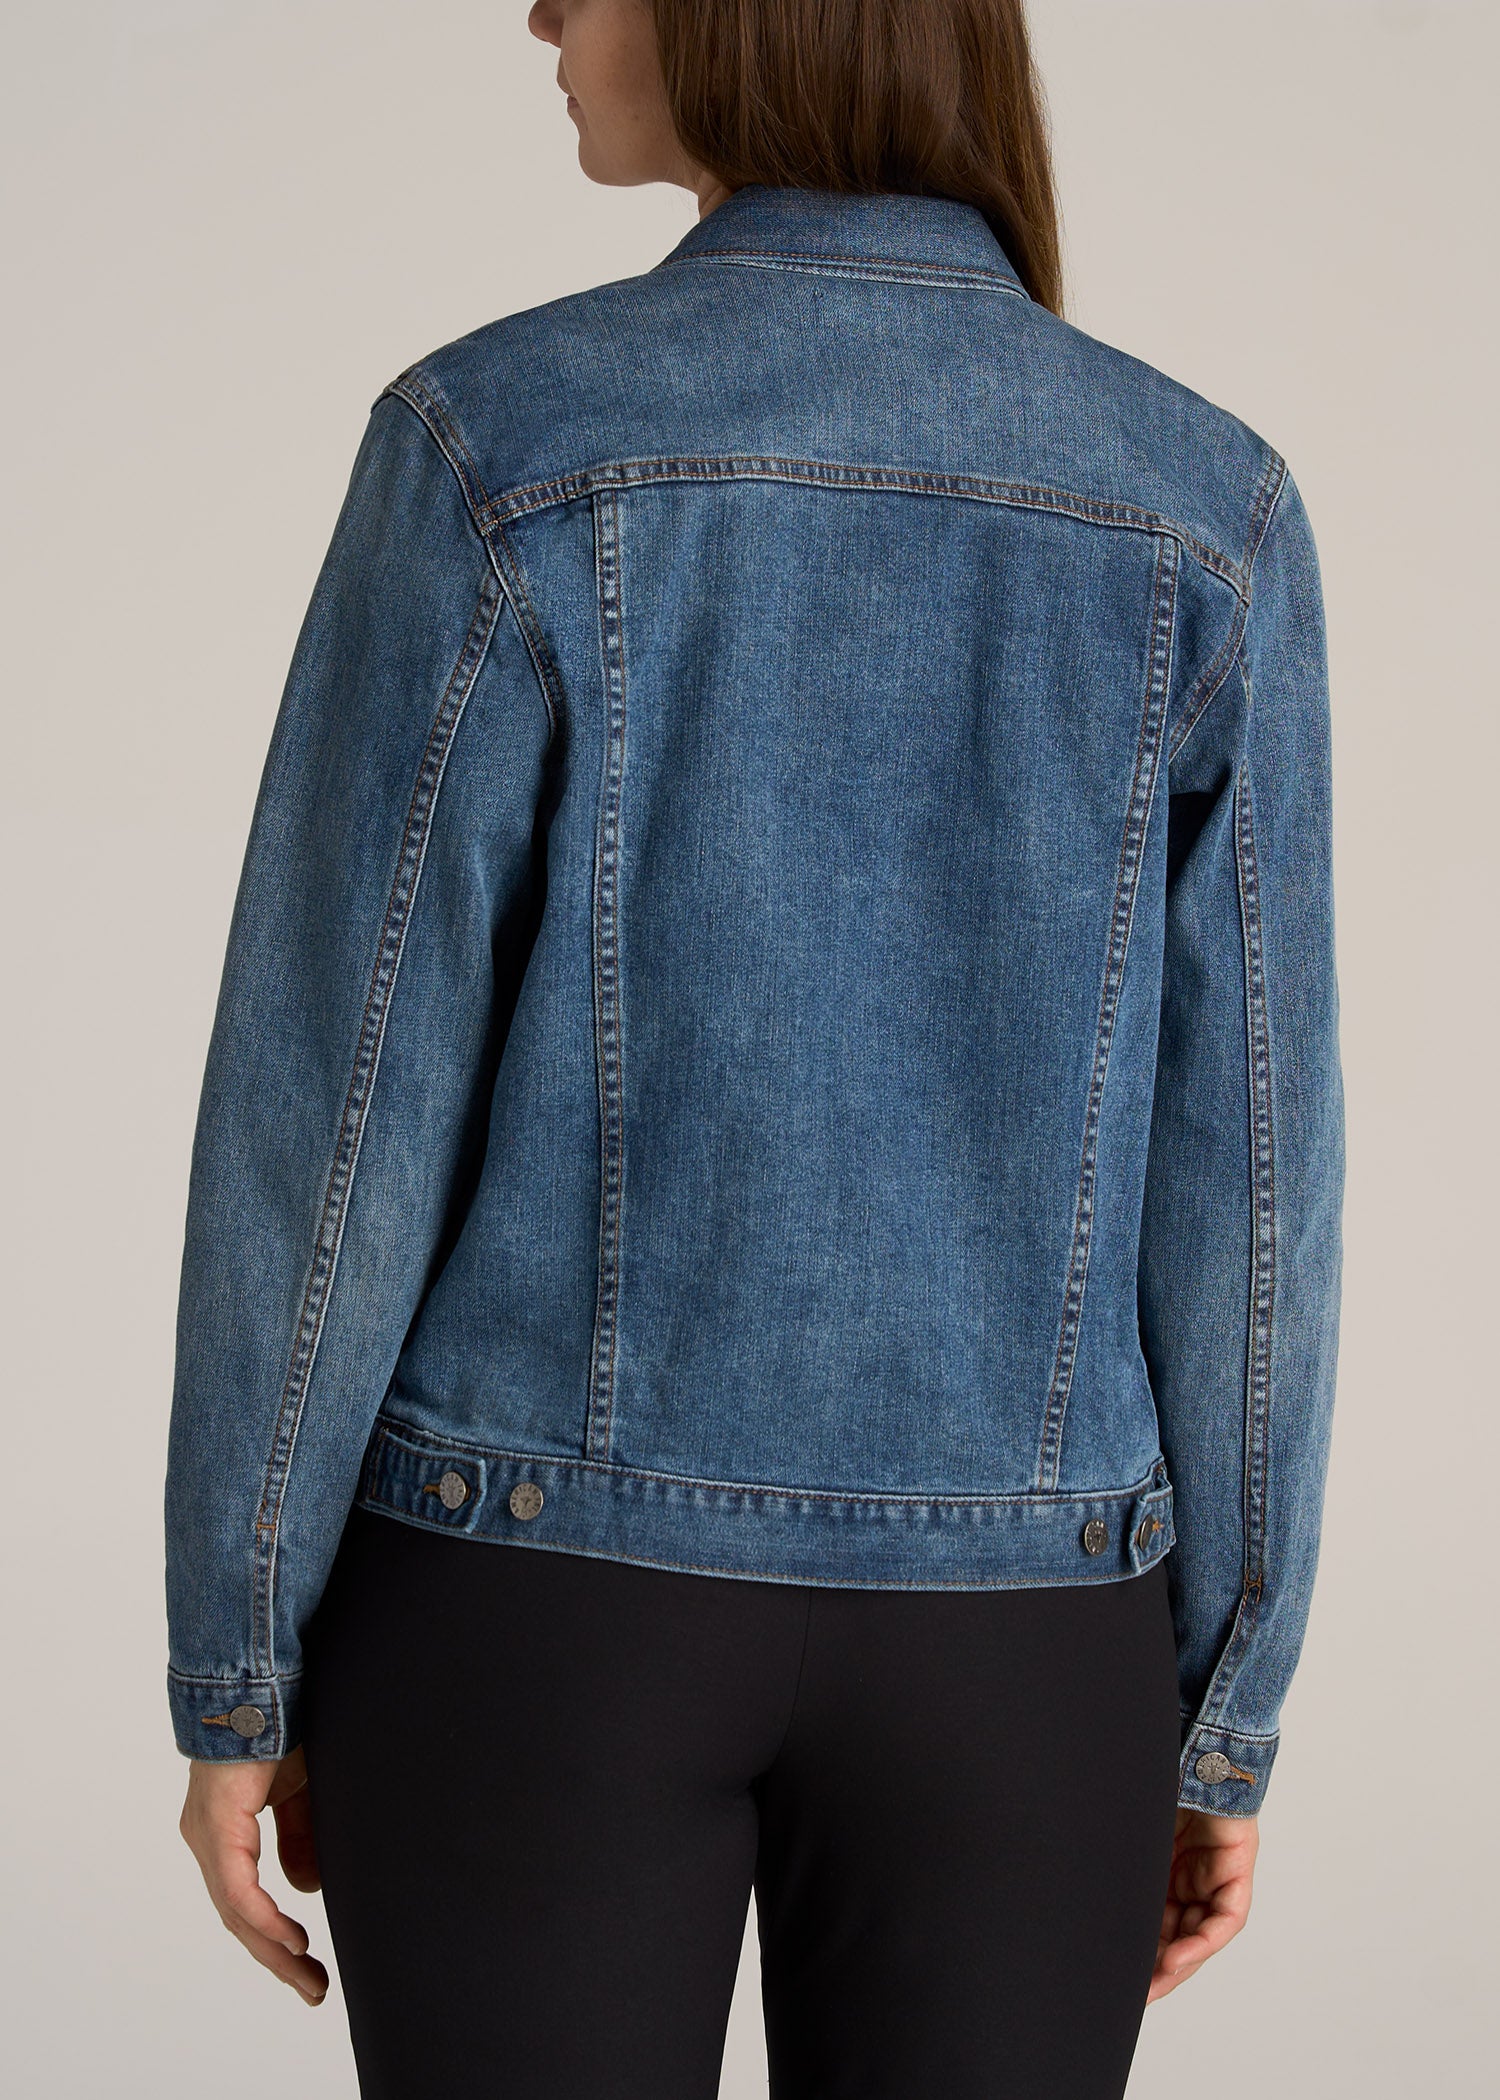 These are denim Essentials. Classic jeans, denim jackets and